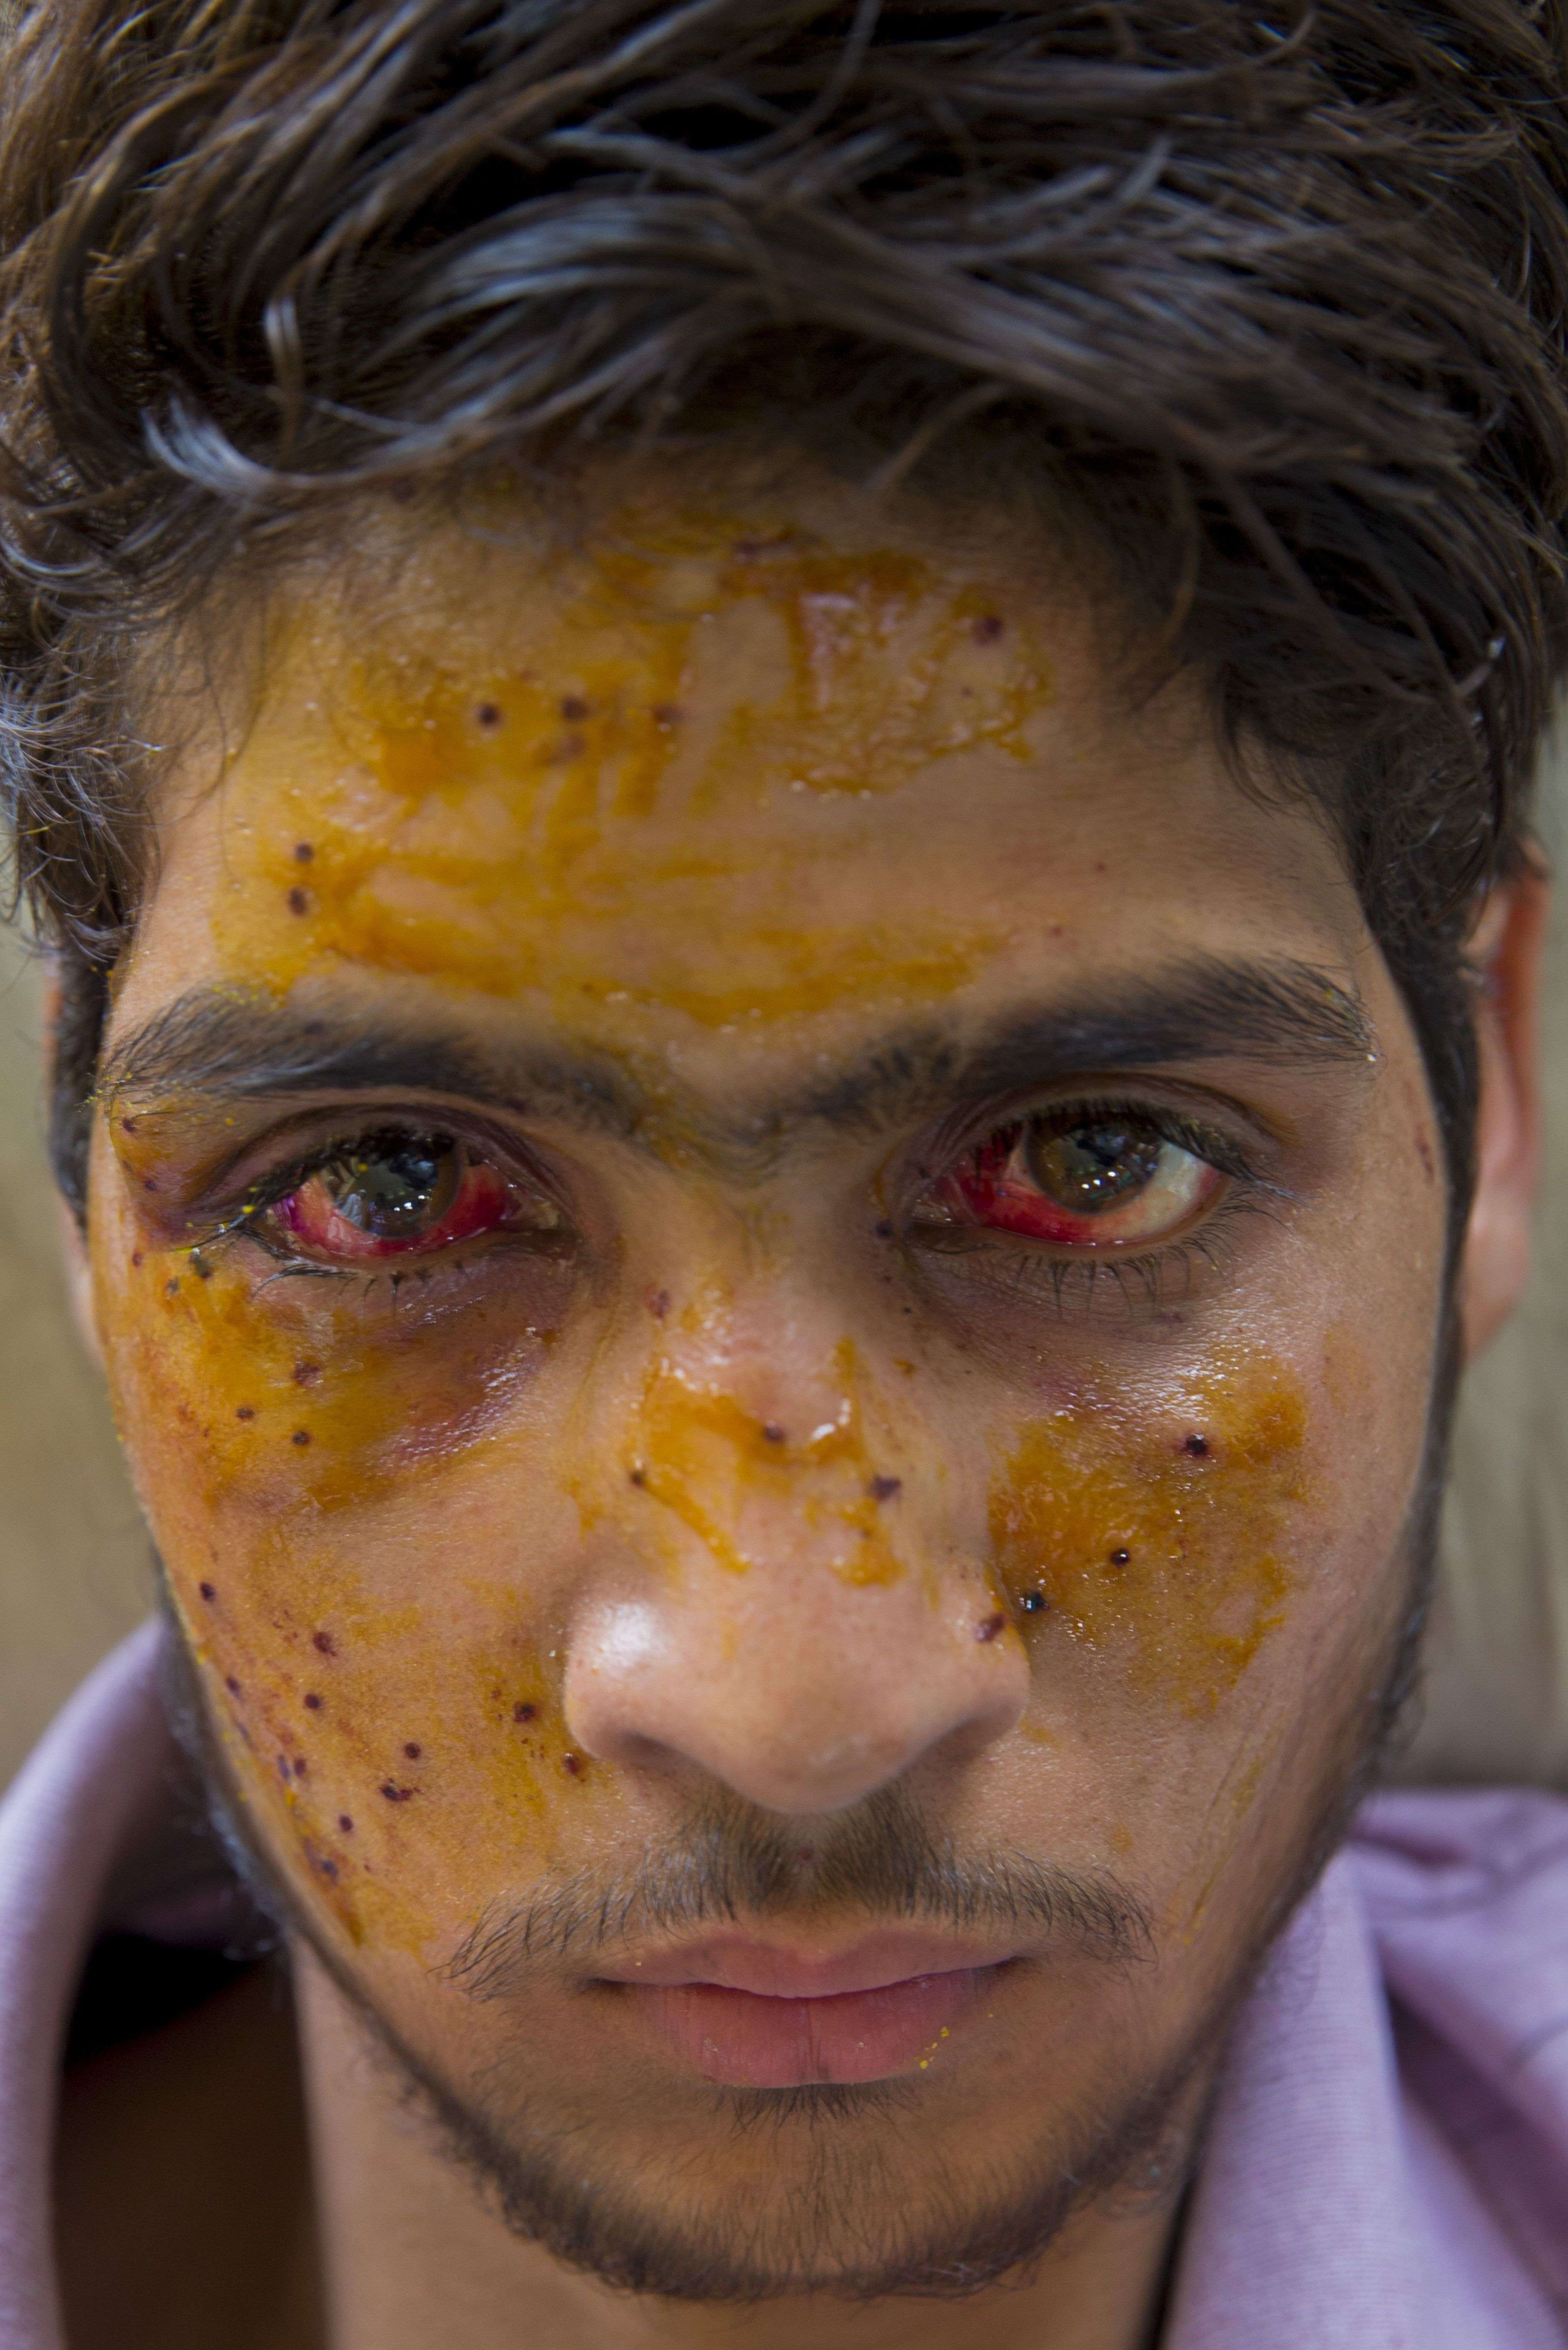 Mohammad Imran Parray, who got wounded after being hit by pellets during a protest recovers at a hospital in Srinagar, Indian controlled Kashmir, Wednesday, July 13, 2016. Hospitals in India's portion of Kashmir are overwhelmed, with hundreds of wounded patients pouring in as the region reels from days of clashes between anti-India protesters and government troops. The violence erupted over the weekend after government troops killed a top leader of Hizbul Mujahideen, the largest rebel group fighting Indian rule in the troubled Himalayan region. (AP Photo/Dar Yasin)